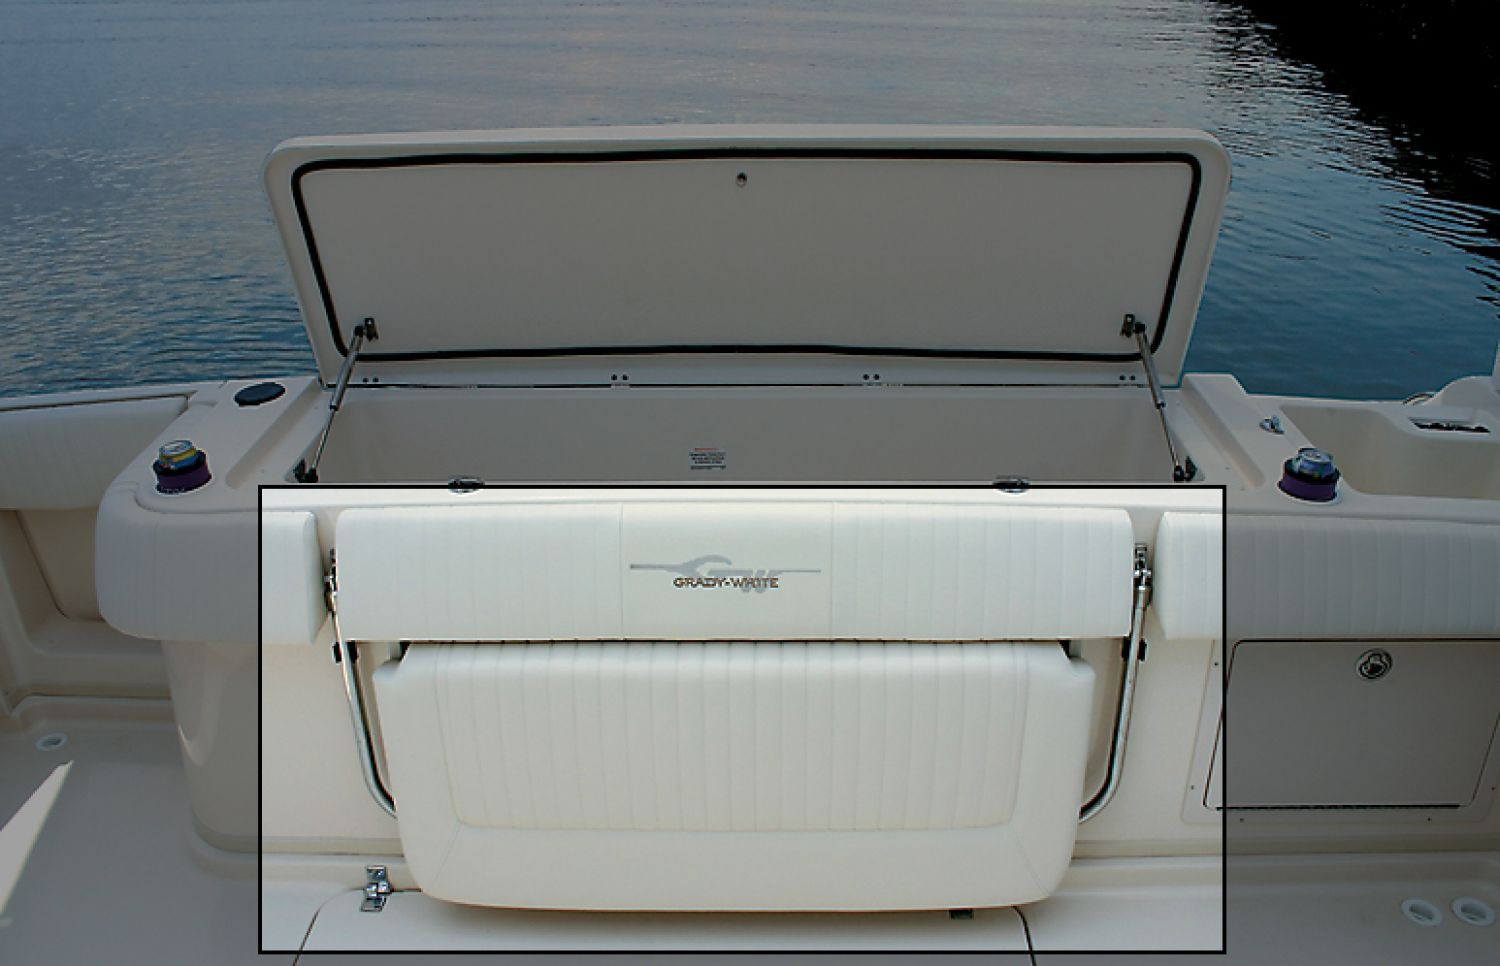 Boat Bench Seat With Storage
 Boat Bench Seat with Storage